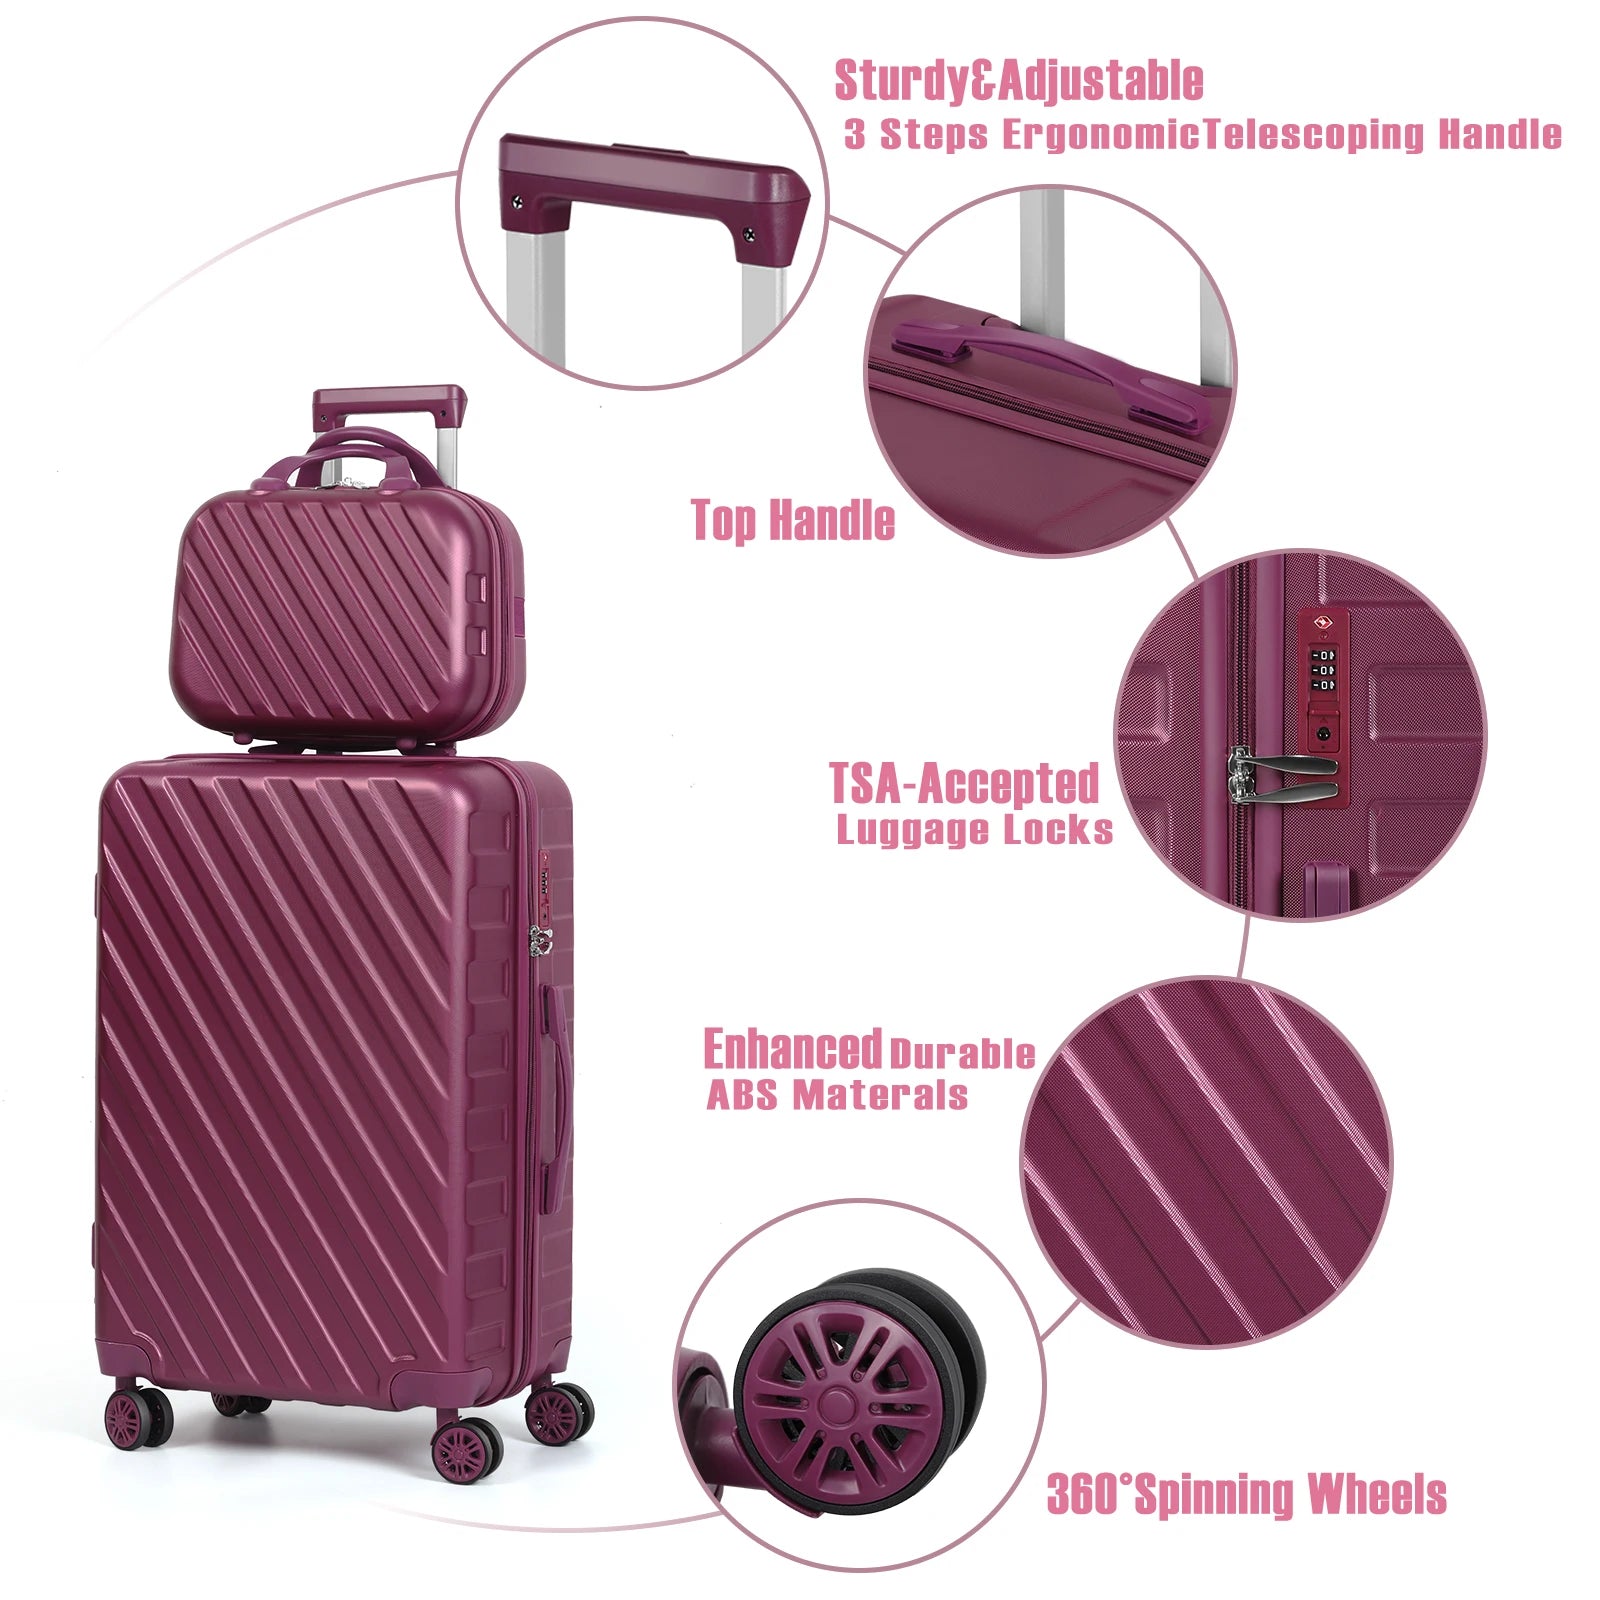 "Premium 5-Piece Black Luggage Set with Silent Spinner Wheels - Perfect for Family Travel!"